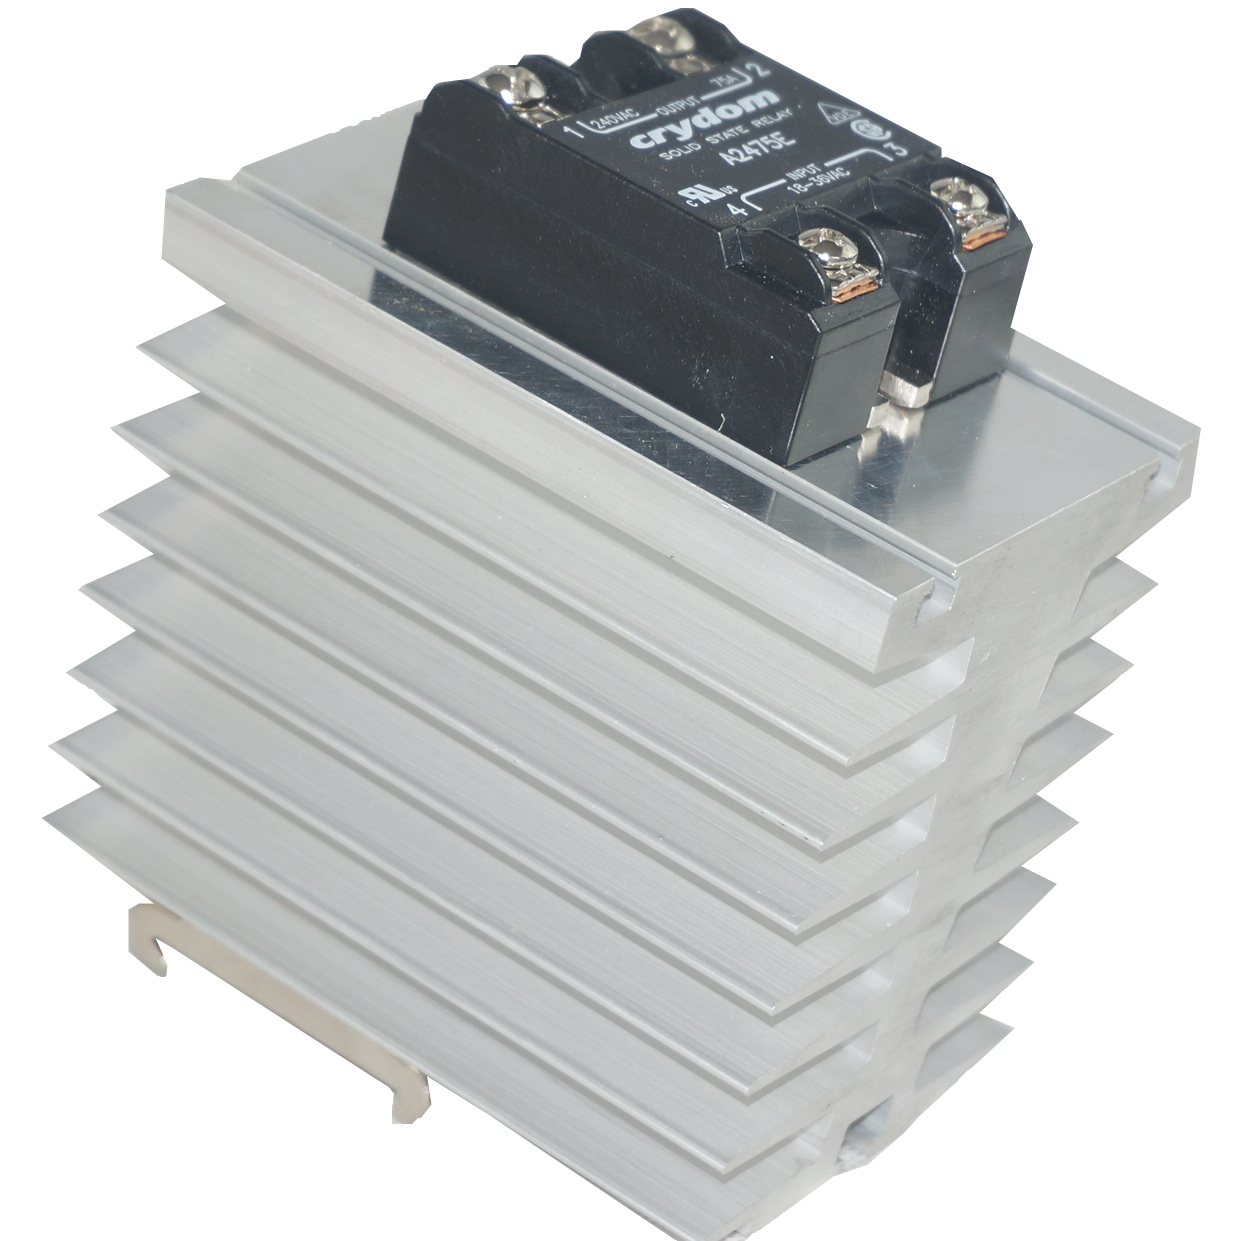 GFIN/150M-DR + HD4875-10, Din Rail Mount Solid State Relay with Heatsink, Random Crossing, 4-32VDC Control Input, 48-530VAC Output, 68 Amps @ 40 Deg C ambient